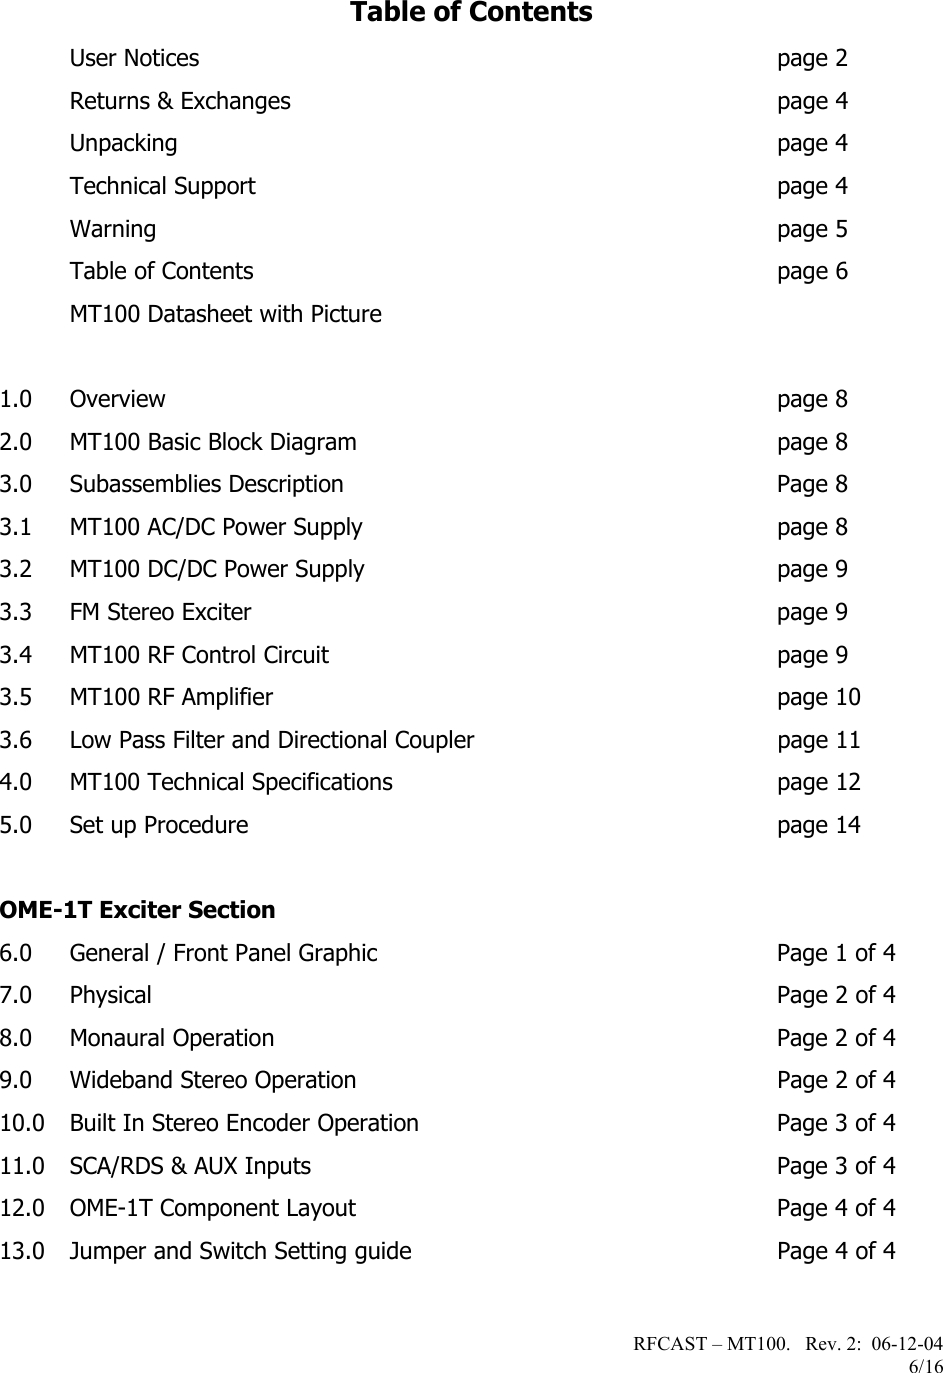 RFCAST – MT100.   Rev. 2:  06-12-04                       6/16   Table of Contents  User Notices  page 2  Returns &amp; Exchanges  page 4  Unpacking  page 4  Technical Support  page 4  Warning page 5   Table of Contents  page 6   MT100 Datasheet with Picture  1.0 Overview page 8 2.0 MT100 Basic Block Diagram  page 8 3.0 Subassemblies Description  Page 8 3.1 MT100 AC/DC Power Supply  page 8 3.2 MT100 DC/DC Power Supply  page 9 3.3 FM Stereo Exciter  page 9 3.4 MT100 RF Control Circuit  page 9 3.5 MT100 RF Amplifier  page 10 3.6 Low Pass Filter and Directional Coupler  page 11 4.0 MT100 Technical Specifications  page 12 5.0 Set up Procedure  page 14   OME-1T Exciter Section 6.0 General / Front Panel Graphic  Page 1 of 4 7.0 Physical  Page 2 of 4 8.0 Monaural Operation  Page 2 of 4 9.0 Wideband Stereo Operation  Page 2 of 4 10.0 Built In Stereo Encoder Operation  Page 3 of 4 11.0 SCA/RDS &amp; AUX Inputs  Page 3 of 4 12.0 OME-1T Component Layout    Page 4 of 4 13.0 Jumper and Switch Setting guide  Page 4 of 4   